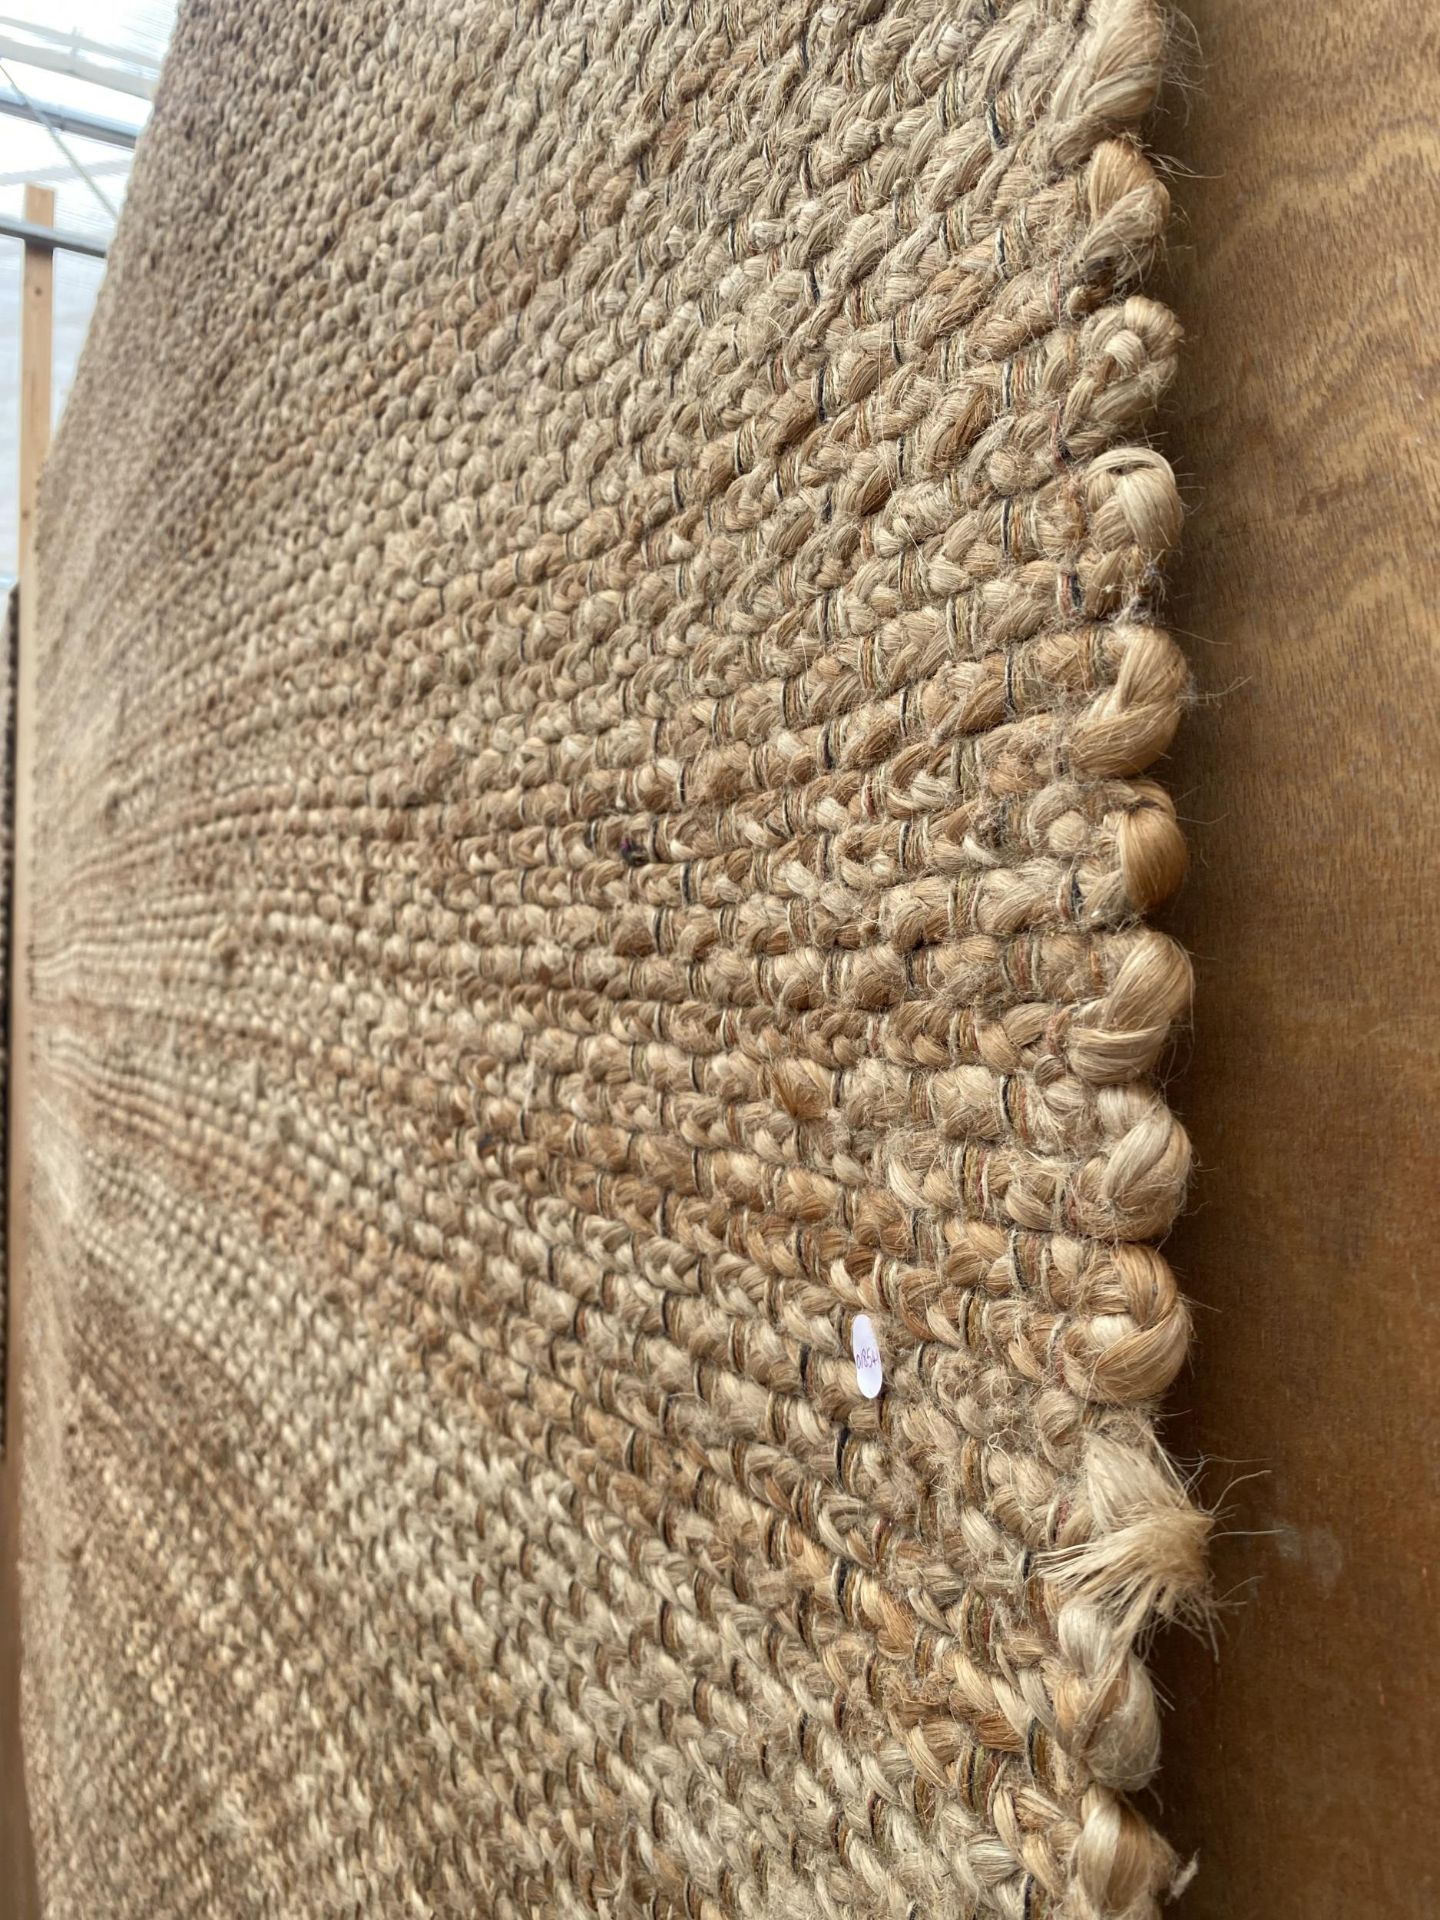 A LARGE MODERN WOVEN RUG - Image 3 of 3